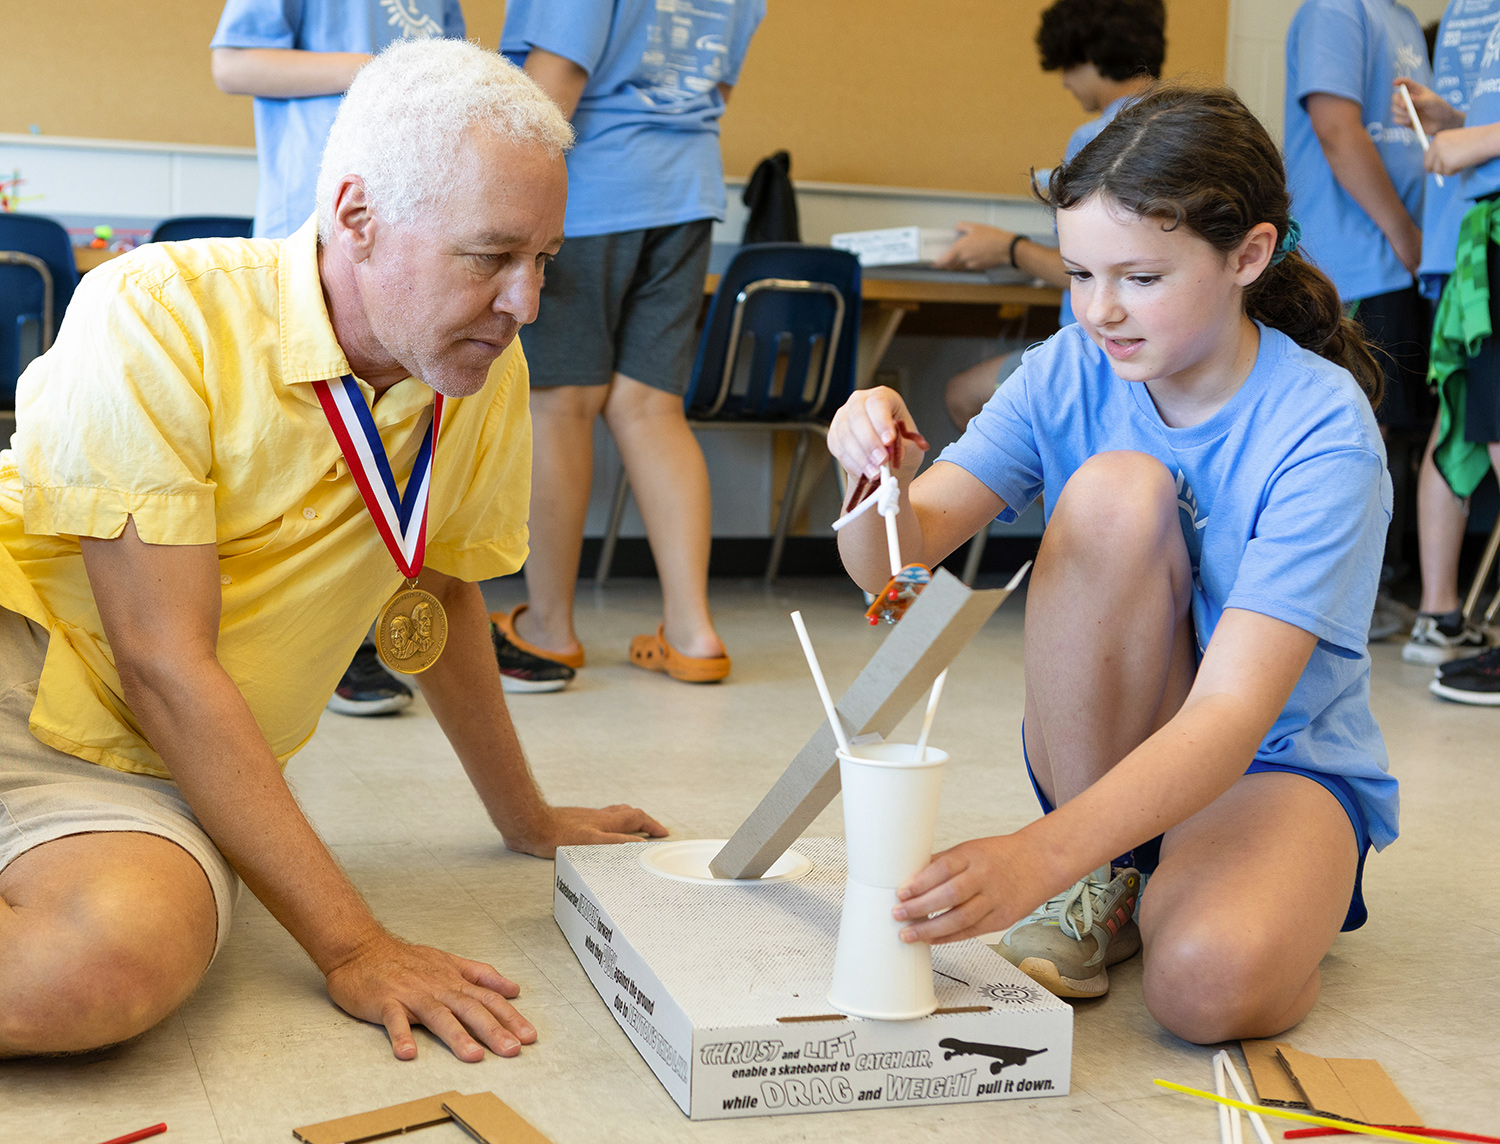 Robert Bryant in a yellow polo shirt and khaki shorts with a National Inventors Hall of Fame medal around his next observes a young girl with brown hair, blue shirt, and blue shorts explain her project in a classroom